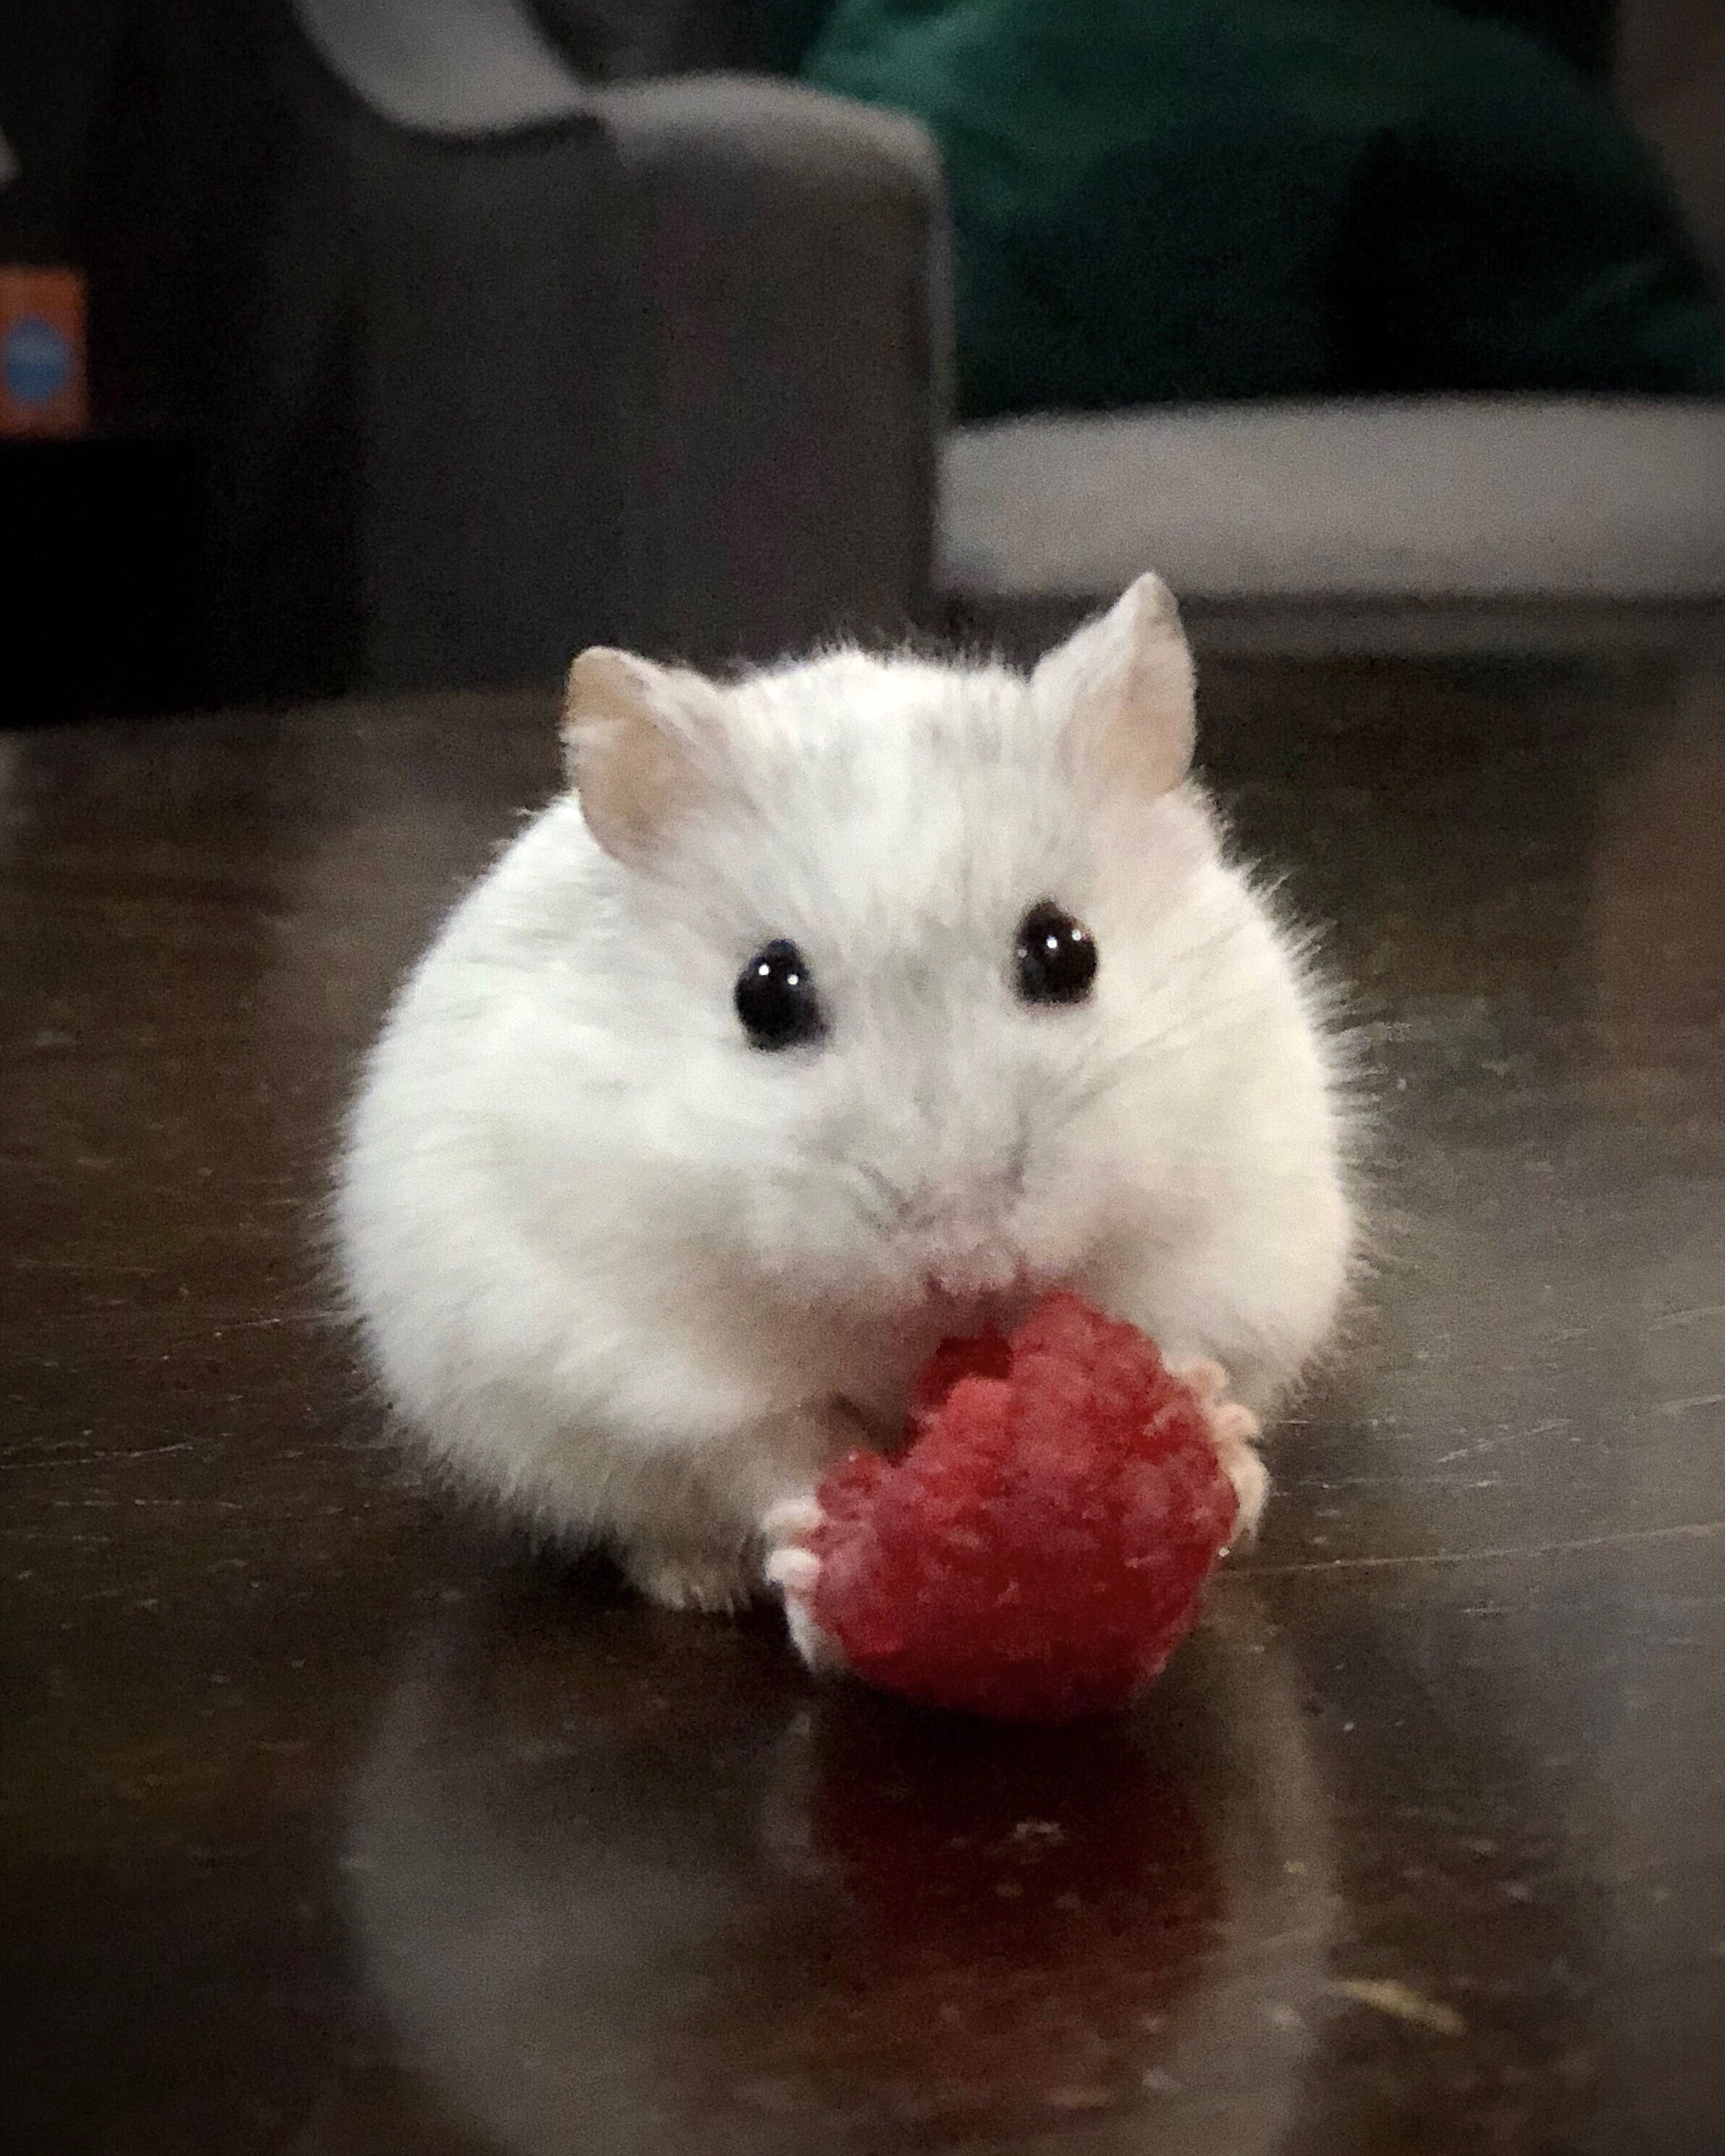 Meet Quartz, a white Djungarian dwarf hamster! Ain't she the cutest? Instagram:. Cute hamsters, Funny hamsters, Cute baby animals